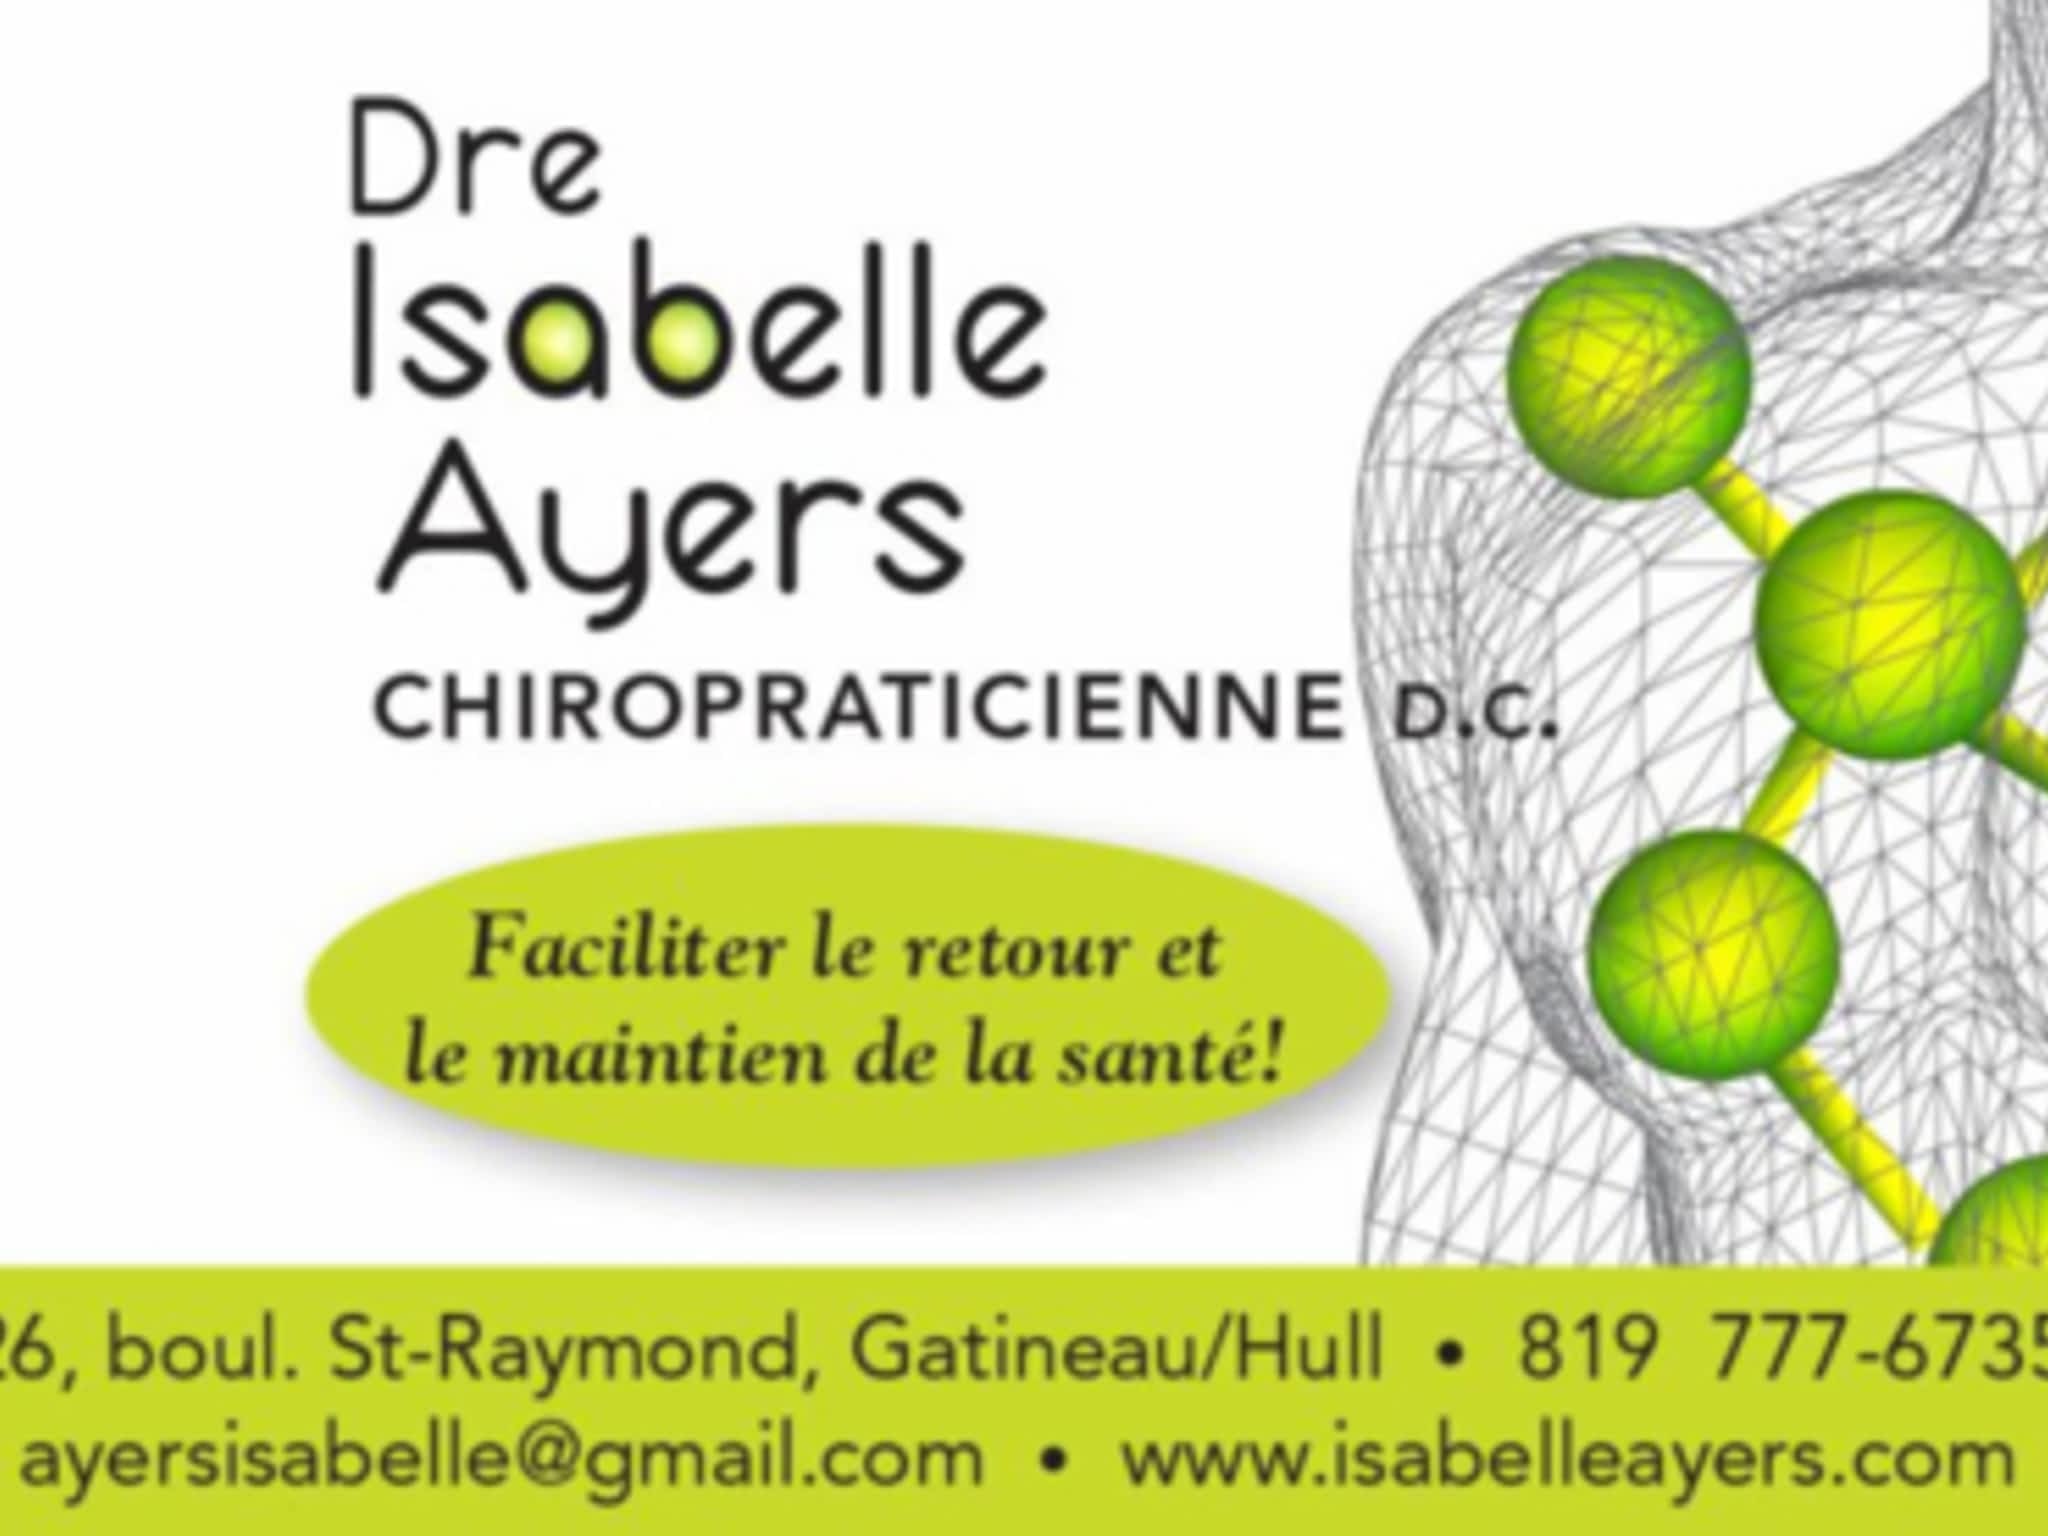 photo Dre Isabelle Ayers Chiropraticienne D.C.